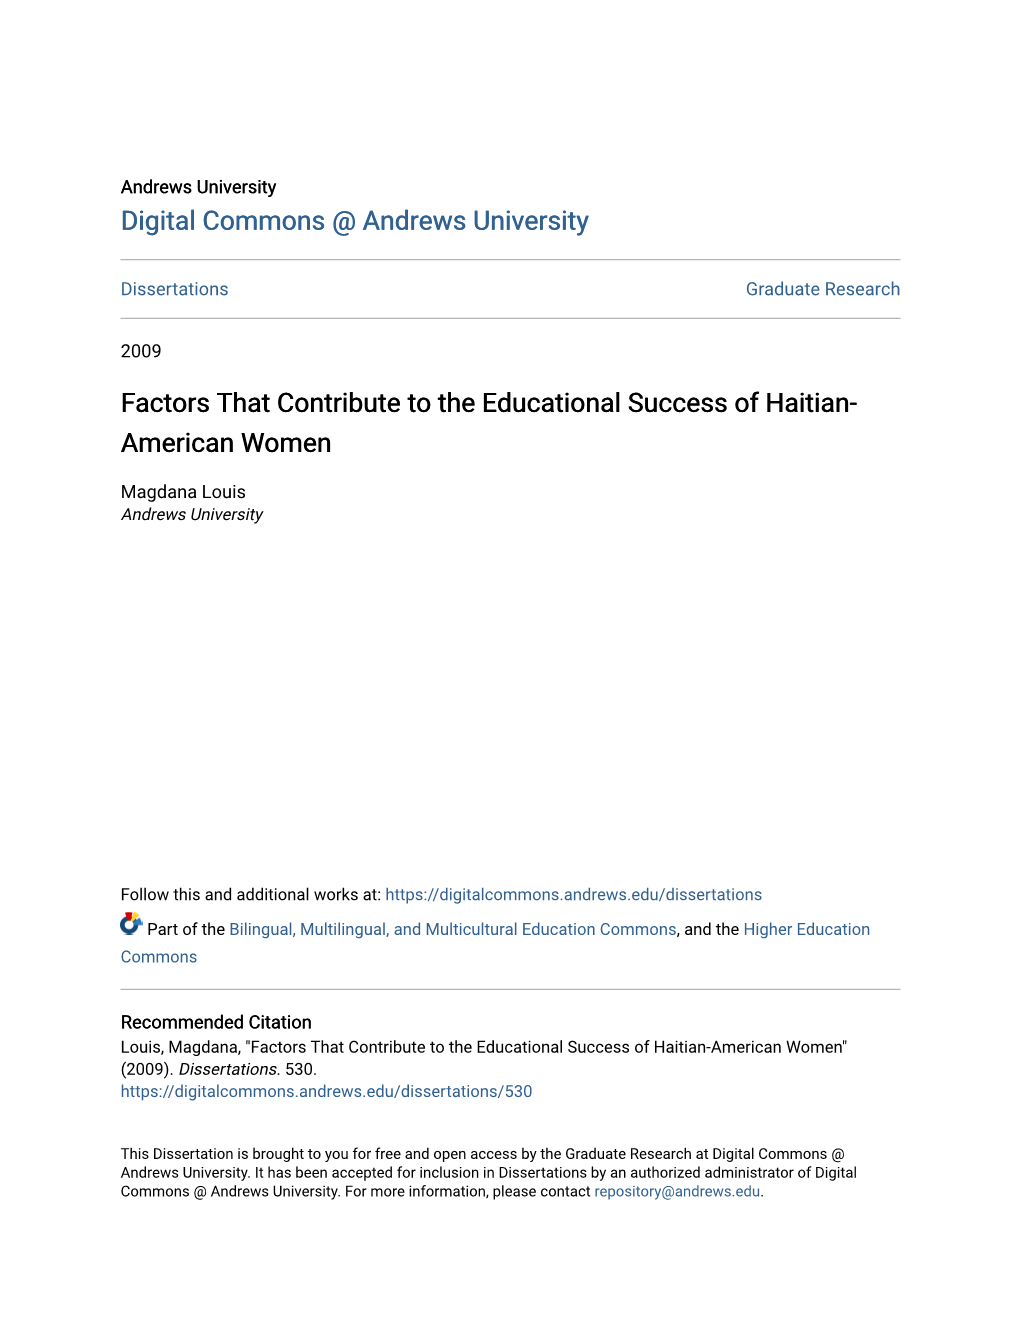 Factors That Contribute to the Educational Success of Haitian- American Women